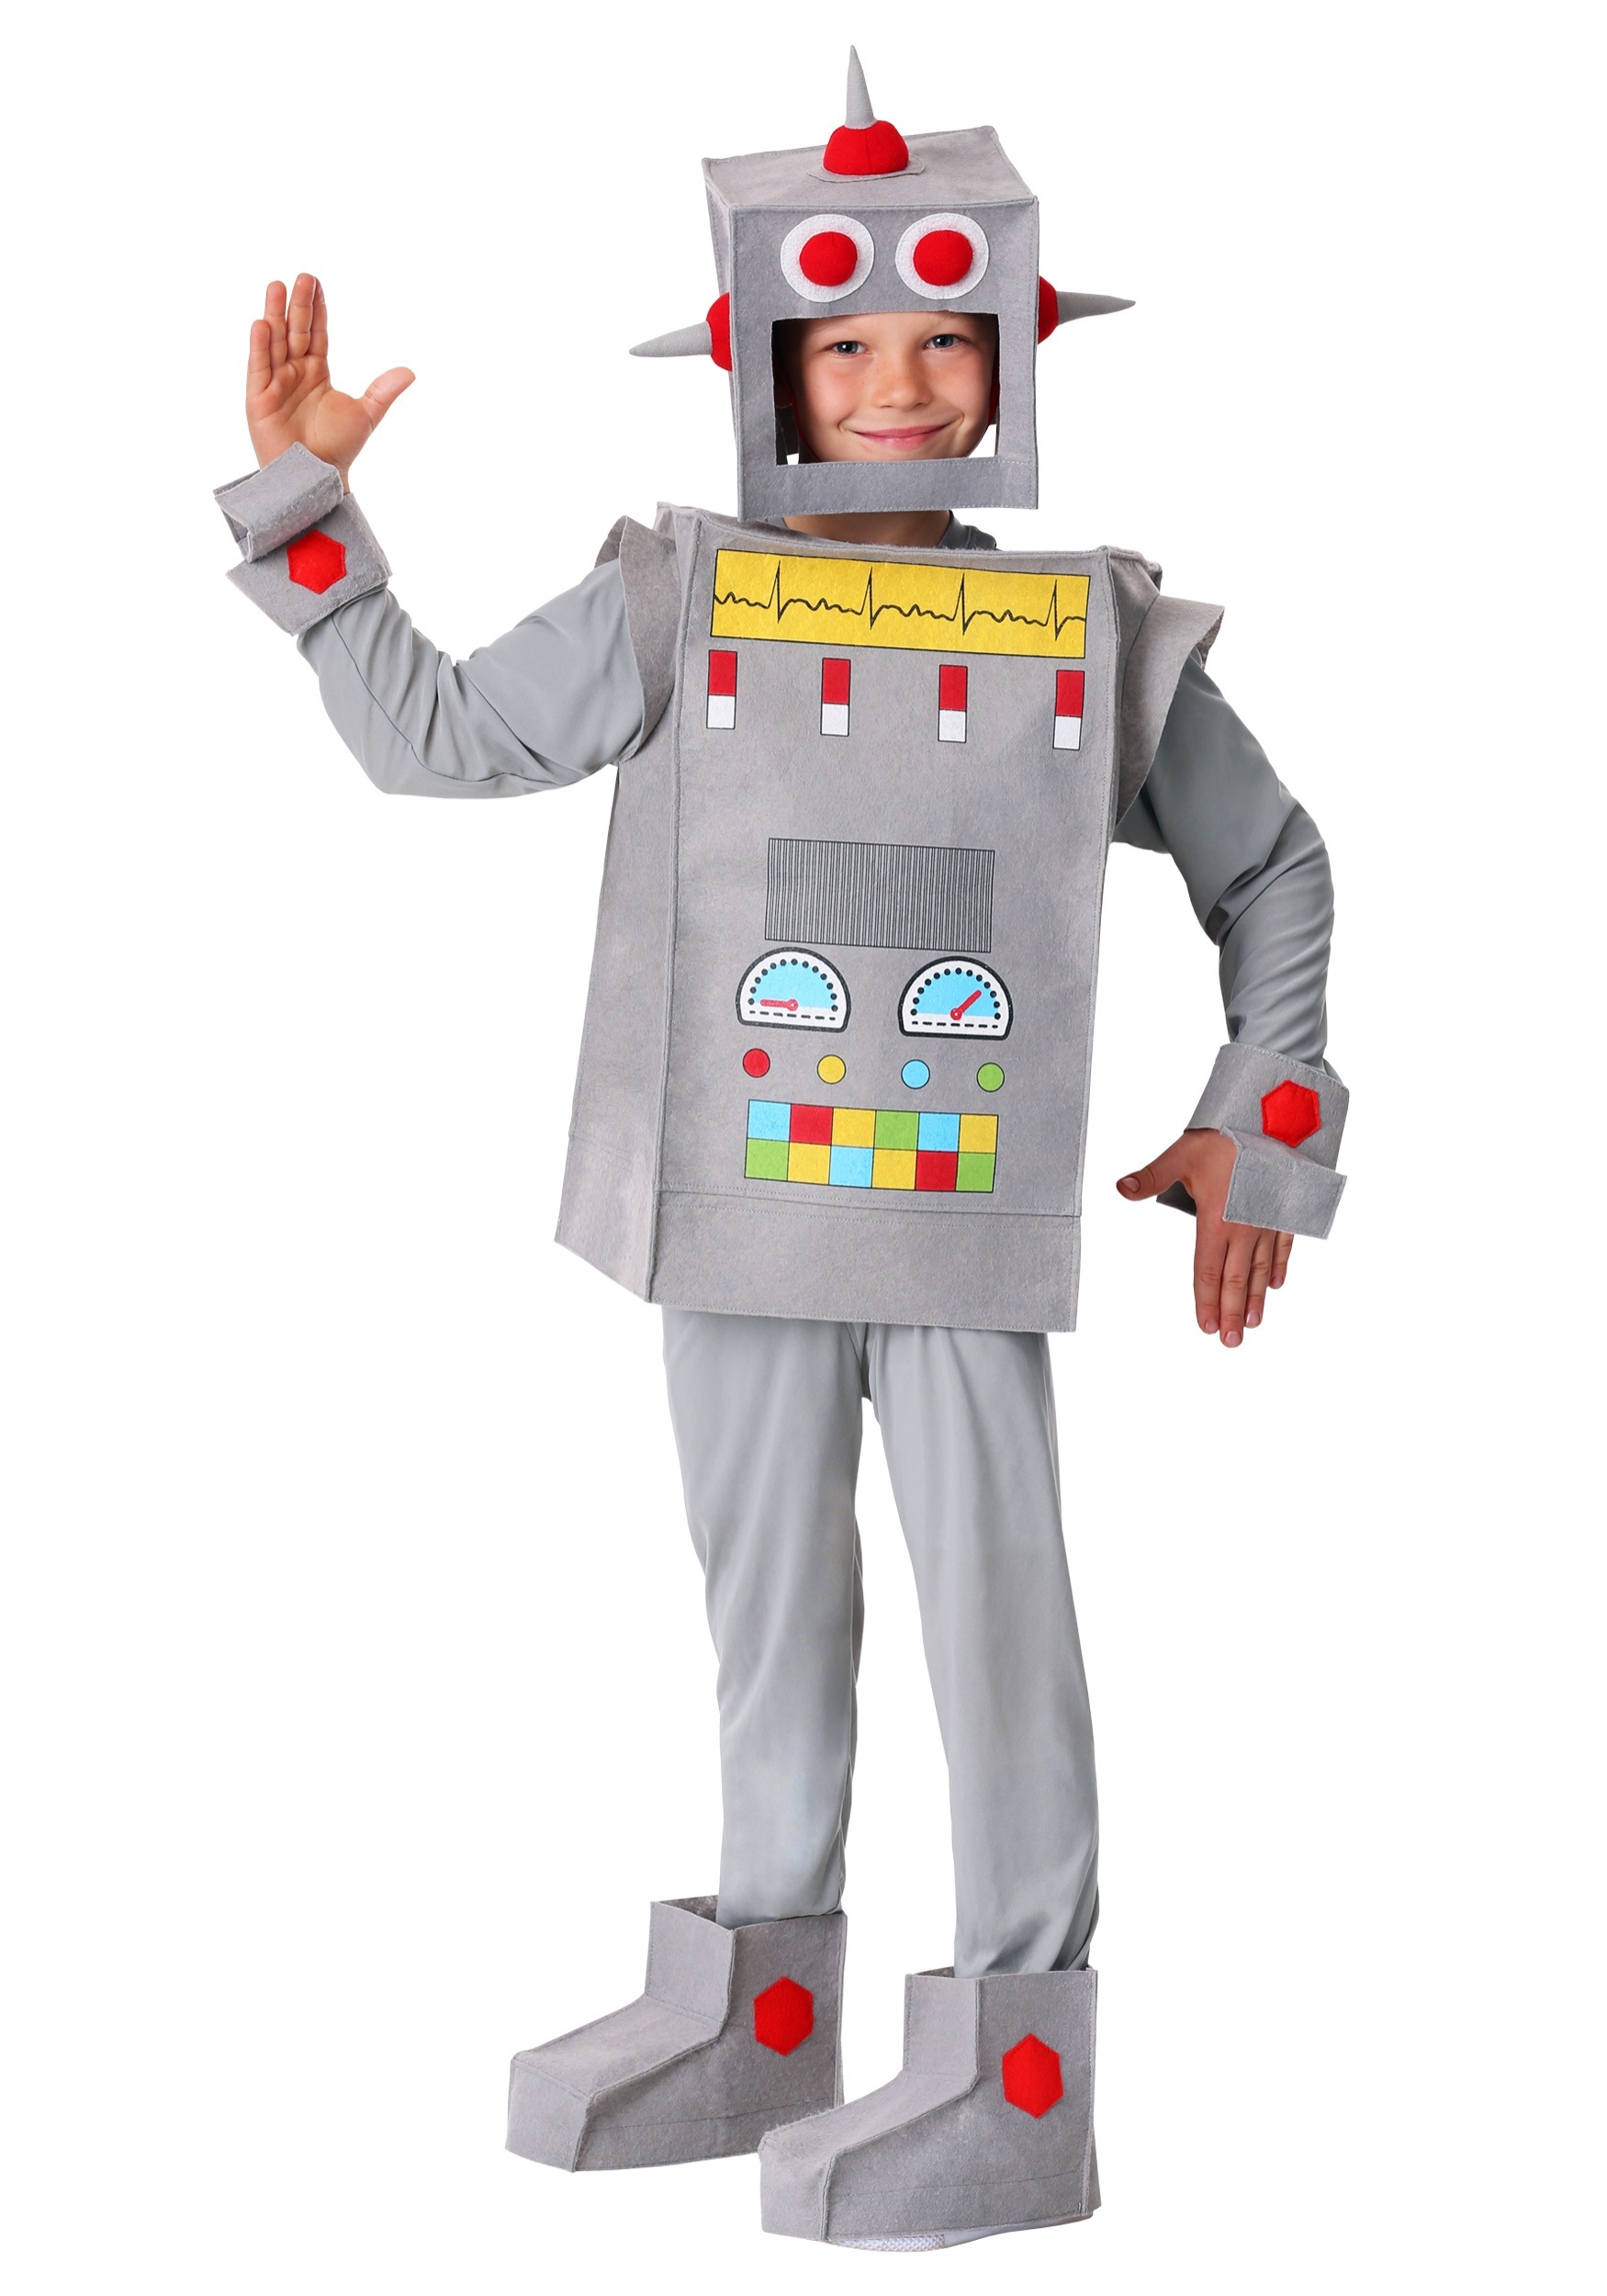 Photos - Fancy Dress FUN Costumes Robot Rascal Costume For Kids Gray/Red/Yellow